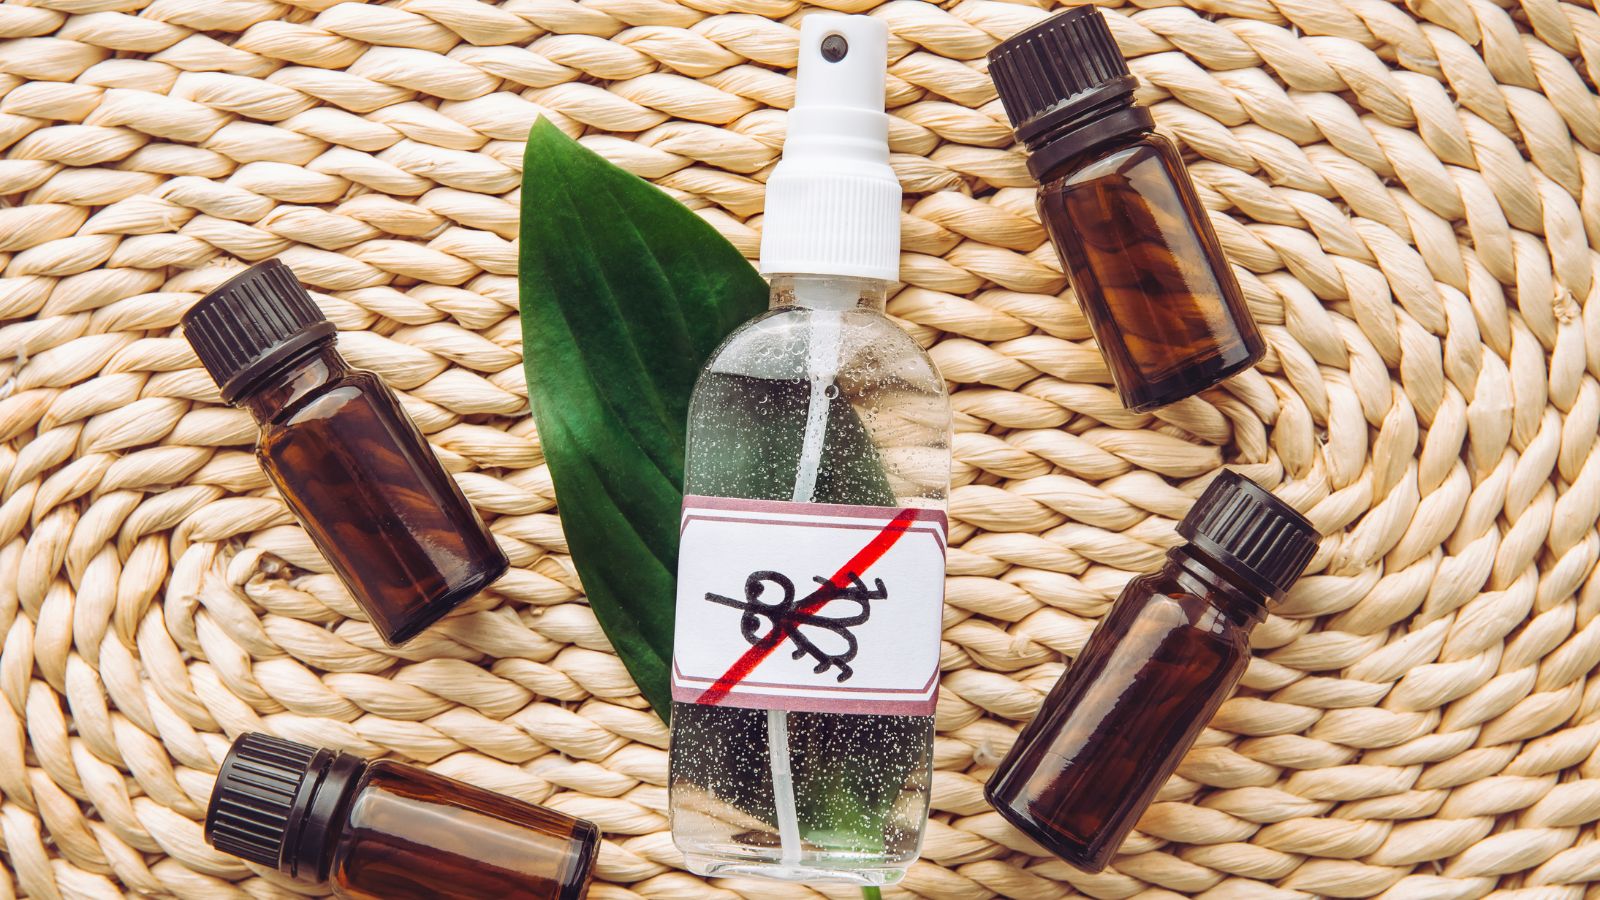 How to Make Your Own Natural Insect Repellent